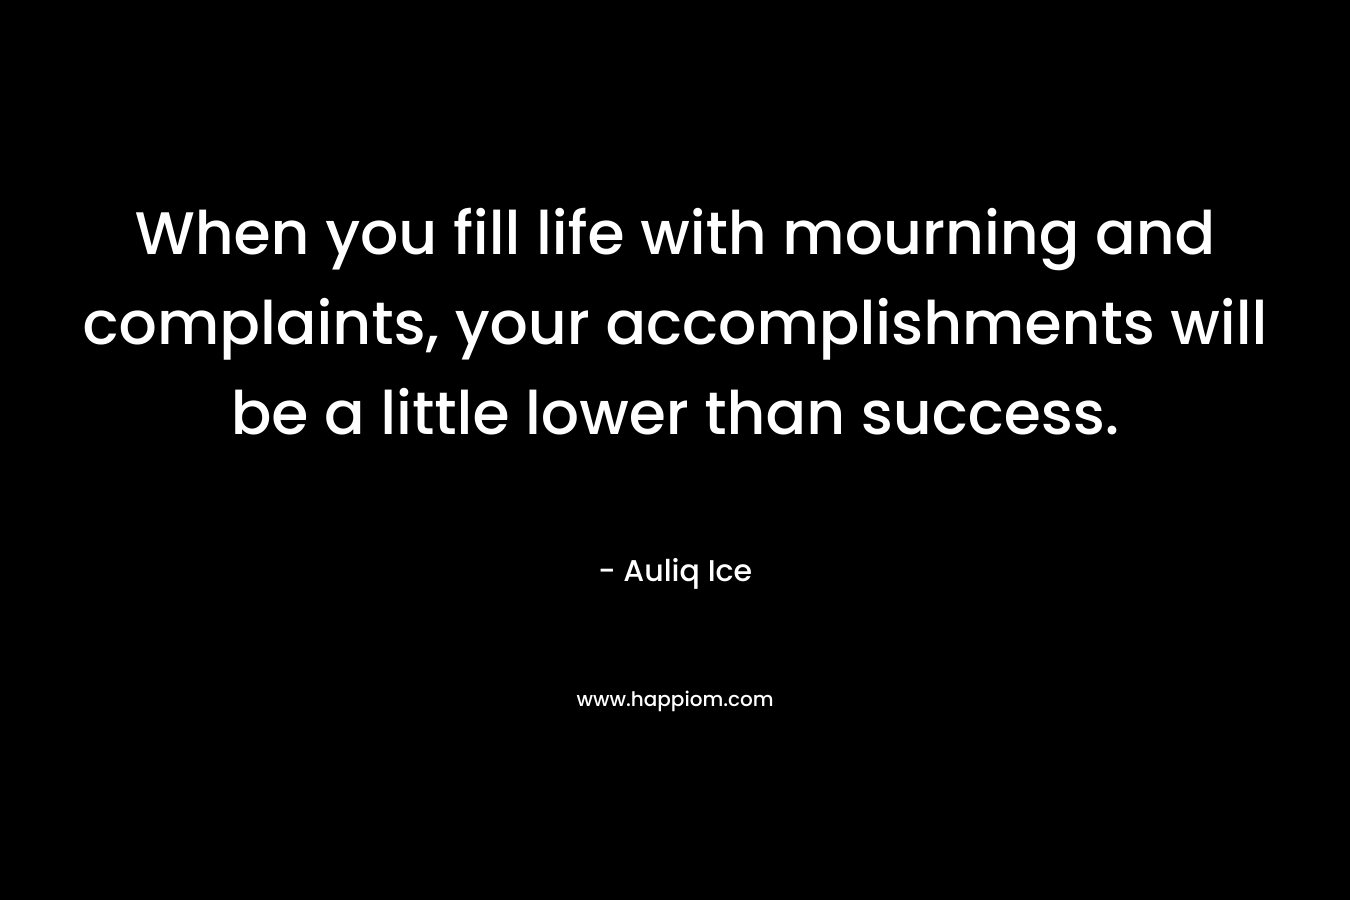 When you fill life with mourning and complaints, your accomplishments will be a little lower than success.